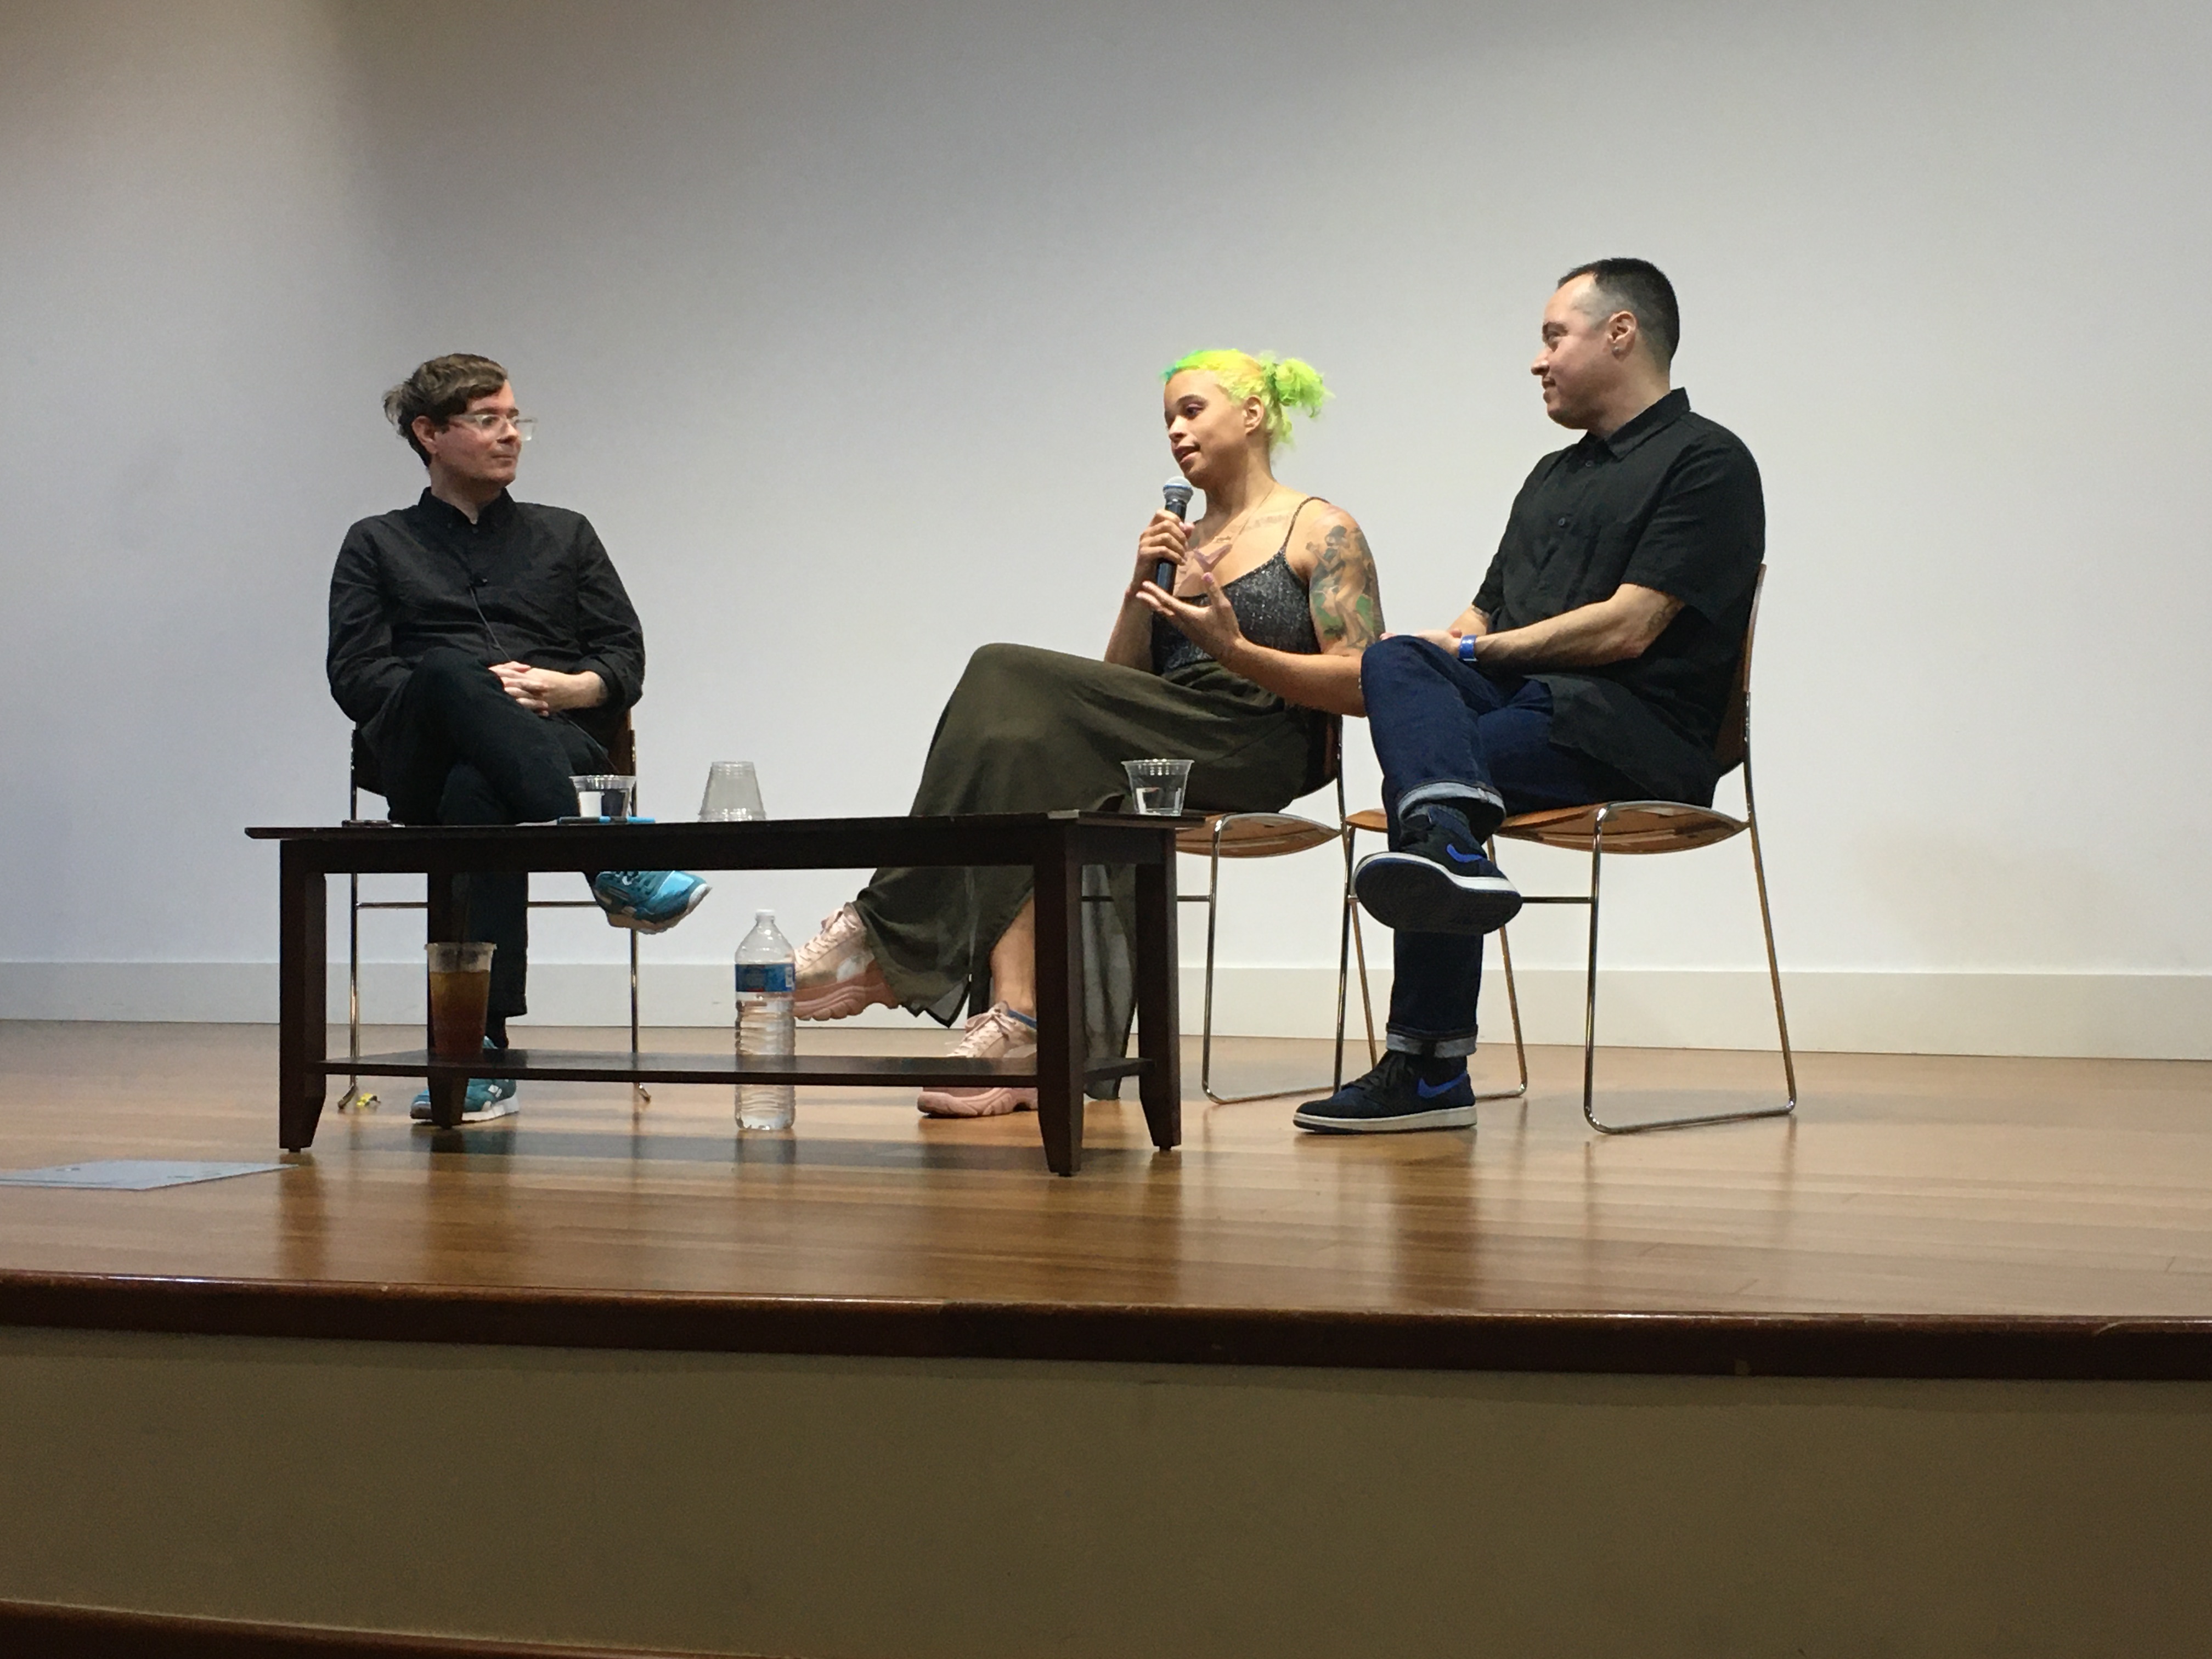 Erik Stanley in conversation with artists Tourmaline and Chris Vargas, during the Opacities: Trans Visual Cultures lecture, spring 2020